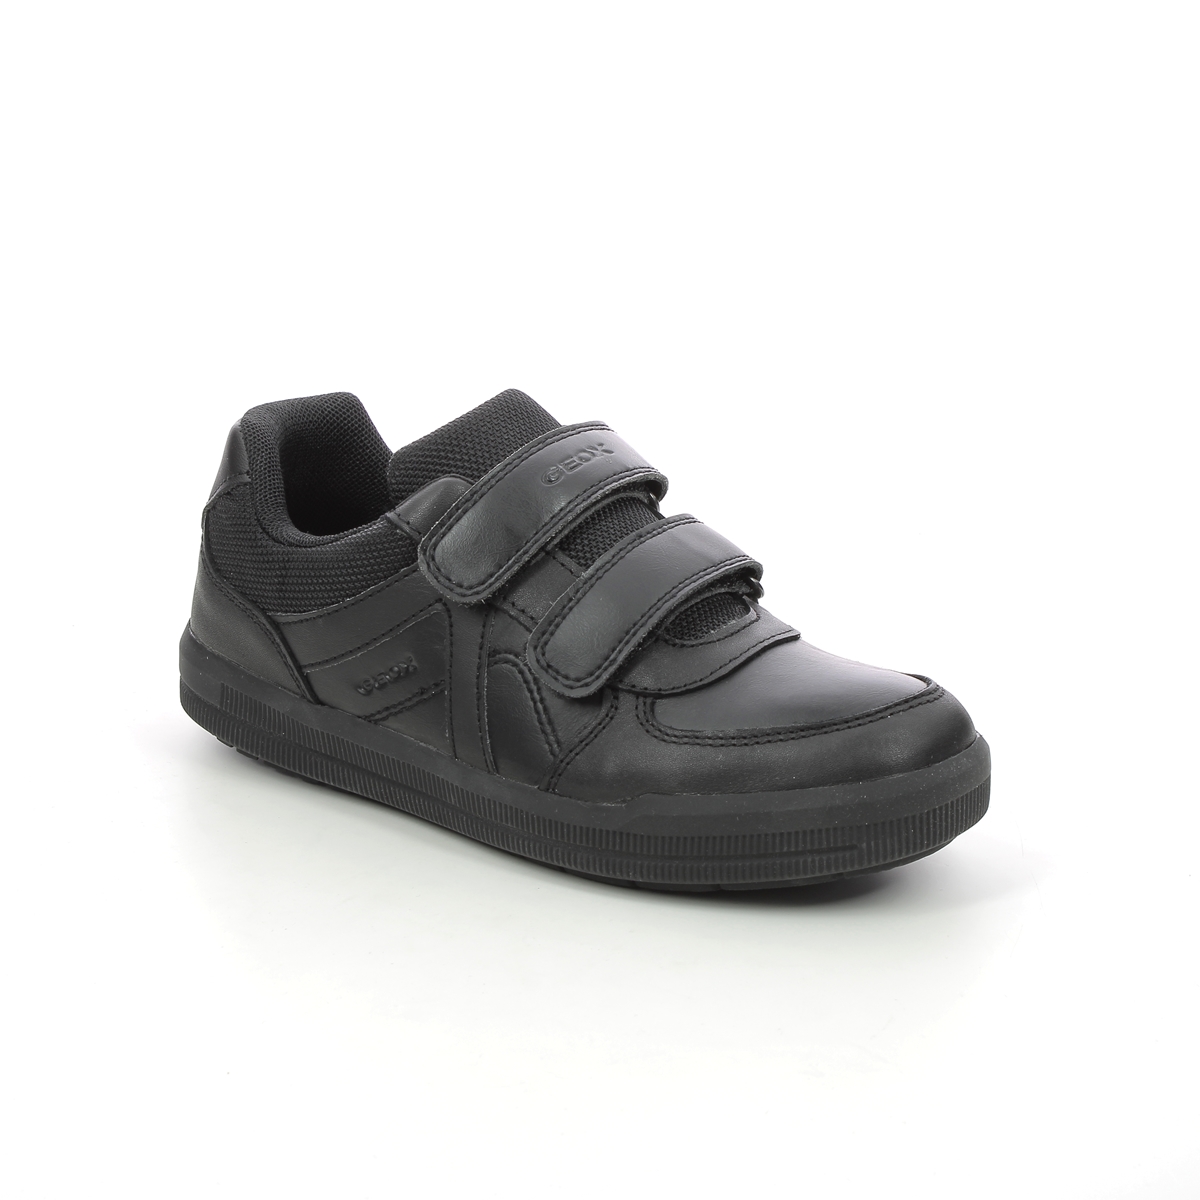 Geox - Arzach Boy Vel (Black Leather) J844Ae-C9999 In Size 29 In Plain Black Leather For School For kids